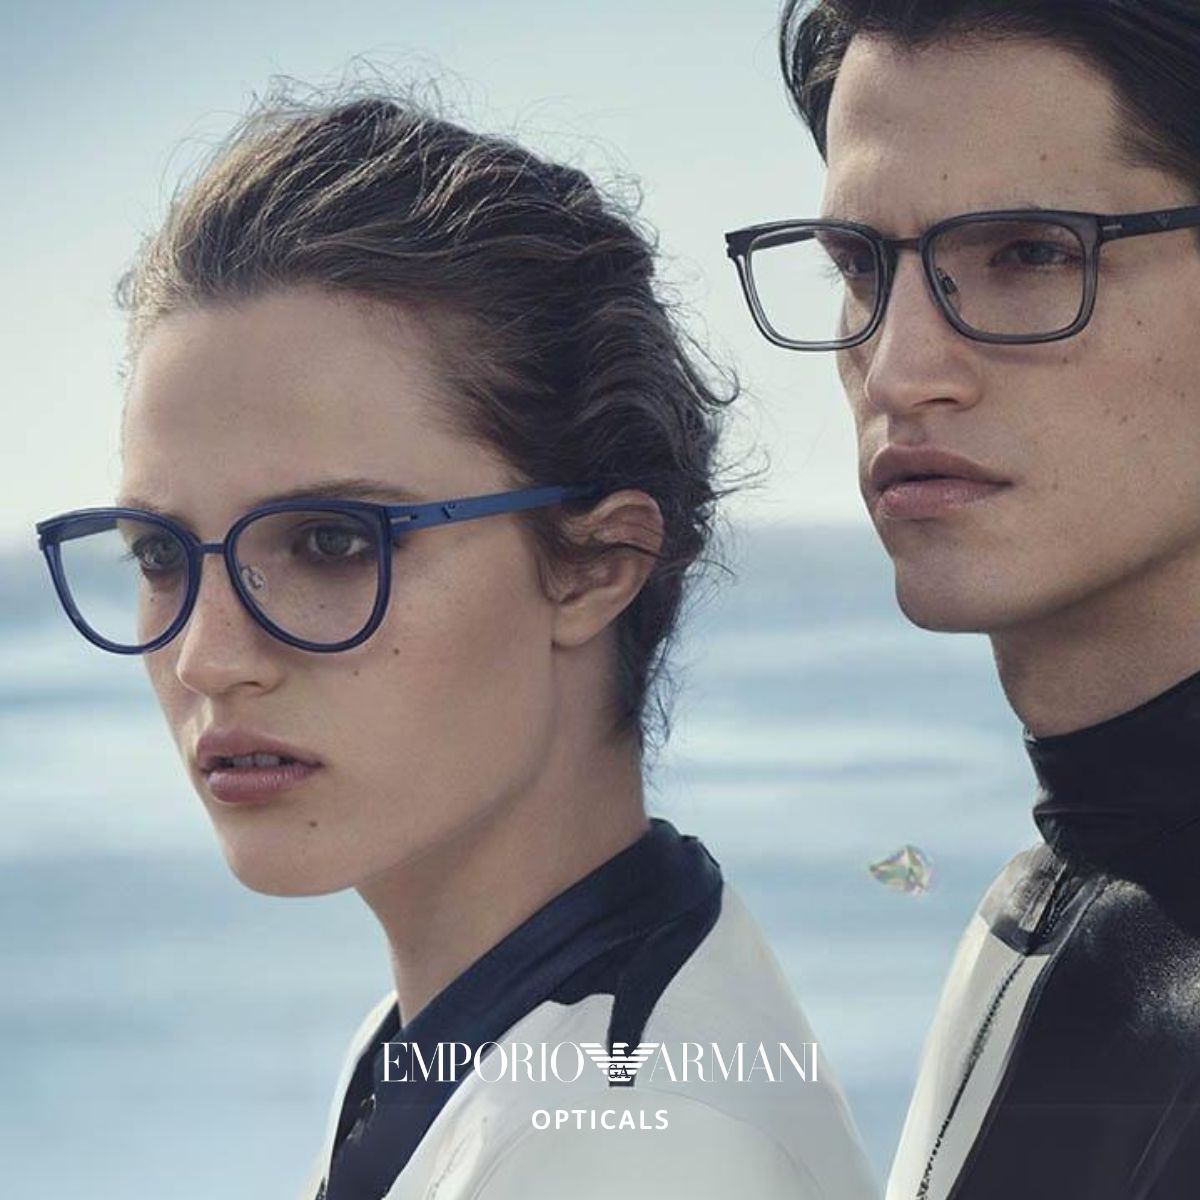 "Designer Emporio Armani optical glasses and frames for men and women, available in trendy and customizable styles at Optorium."